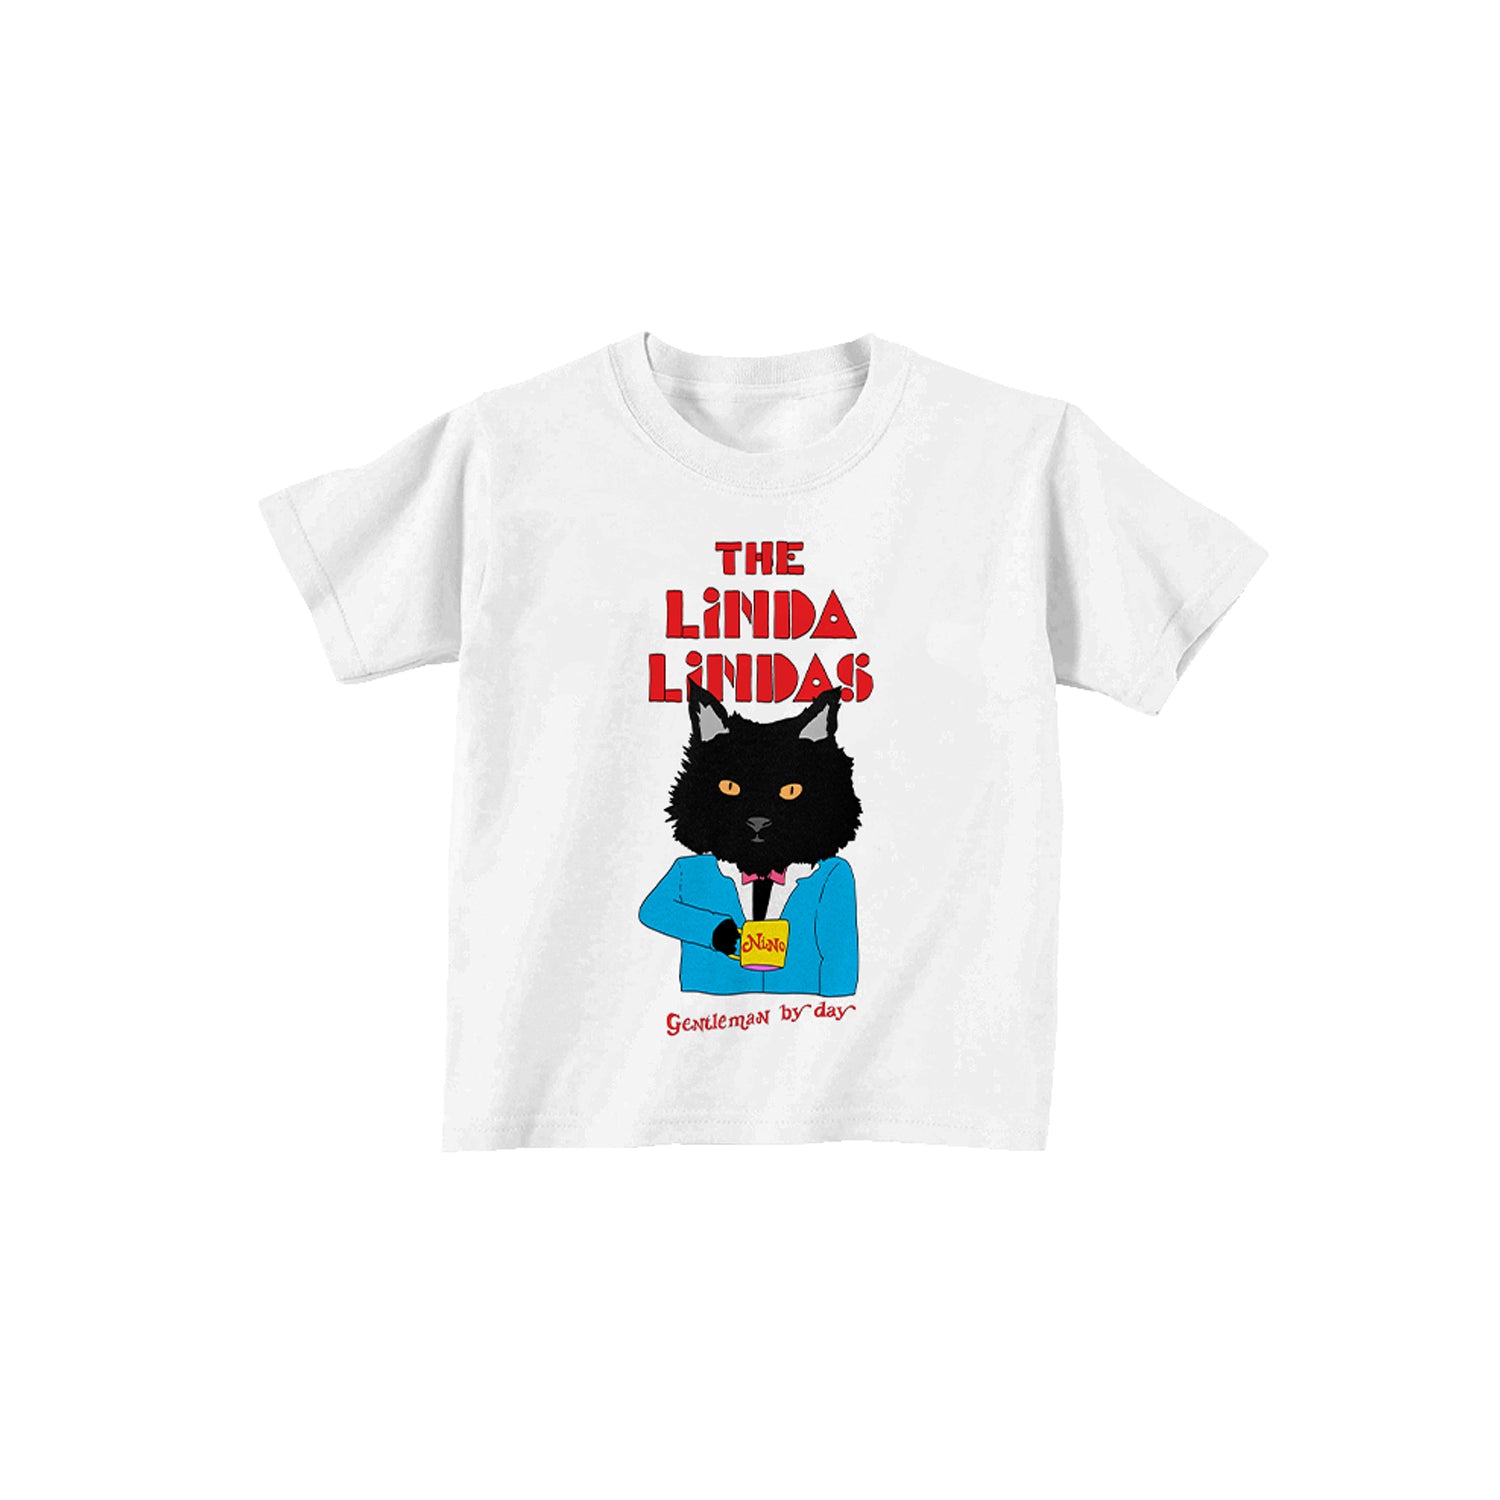  Image of a white tshirt against a white background. The center says the linda lindas in red blocky text. Below that is a graphic of a black cat from the waist up. The cat is wearing a blue suit and holding a cup of coffee. The coffee cup is yellow and says "Nino" in red text. Below this in thin red text reads "gentleman by day".